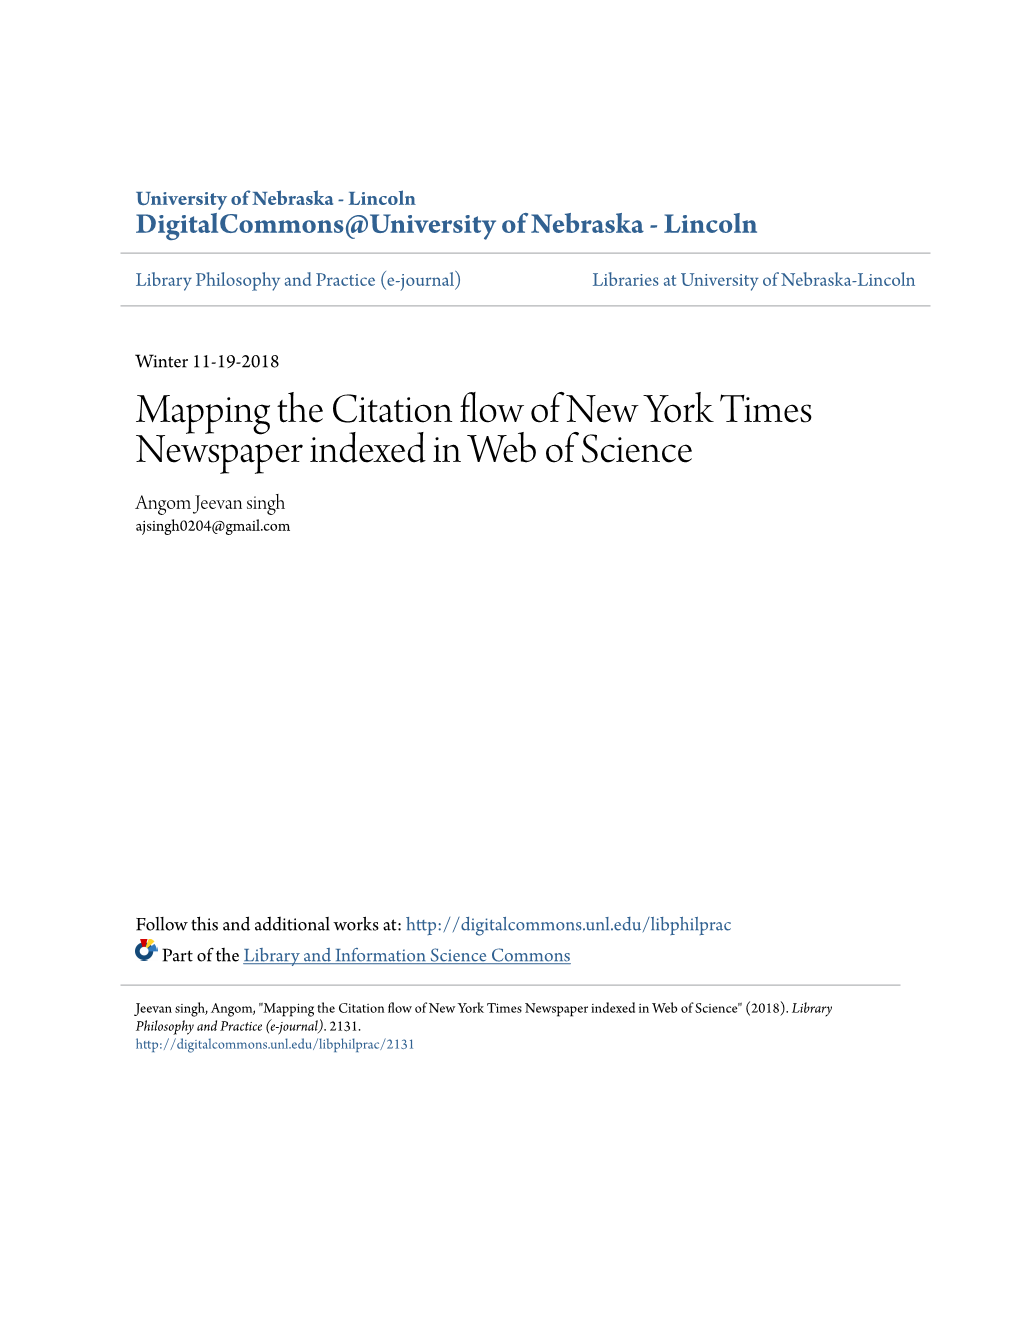 Mapping the Citation Flow of New York Times Newspaper Indexed in Web of Science Angom Jeevan Singh Ajsingh0204@Gmail.Com